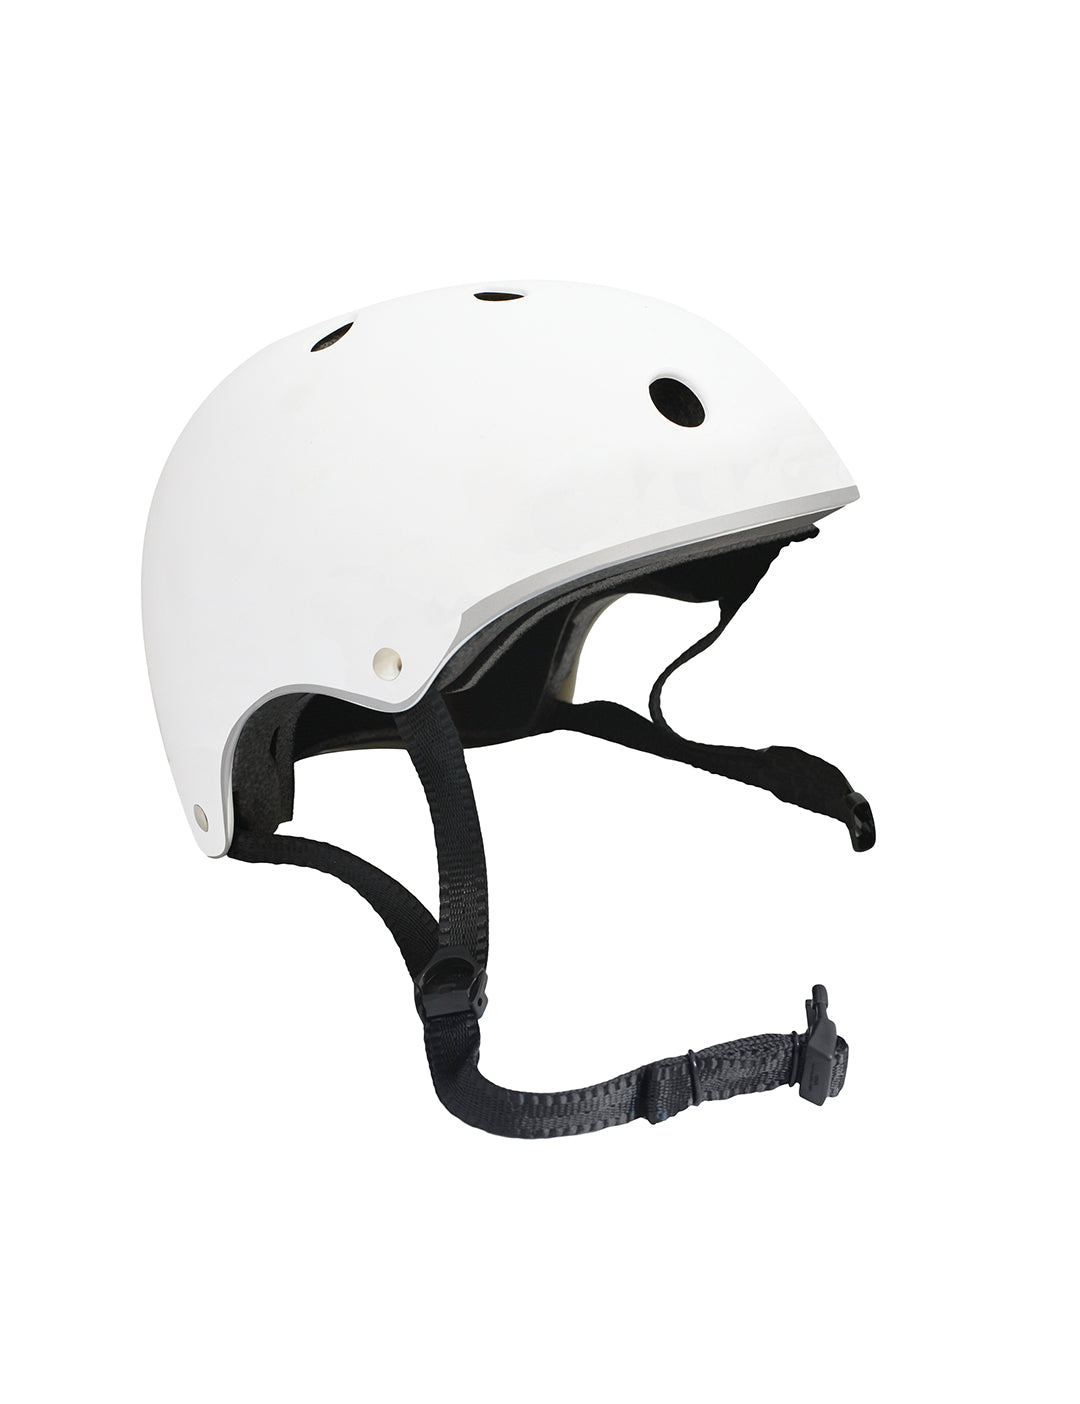 Helmets Adjustable for Kids Youth Adults